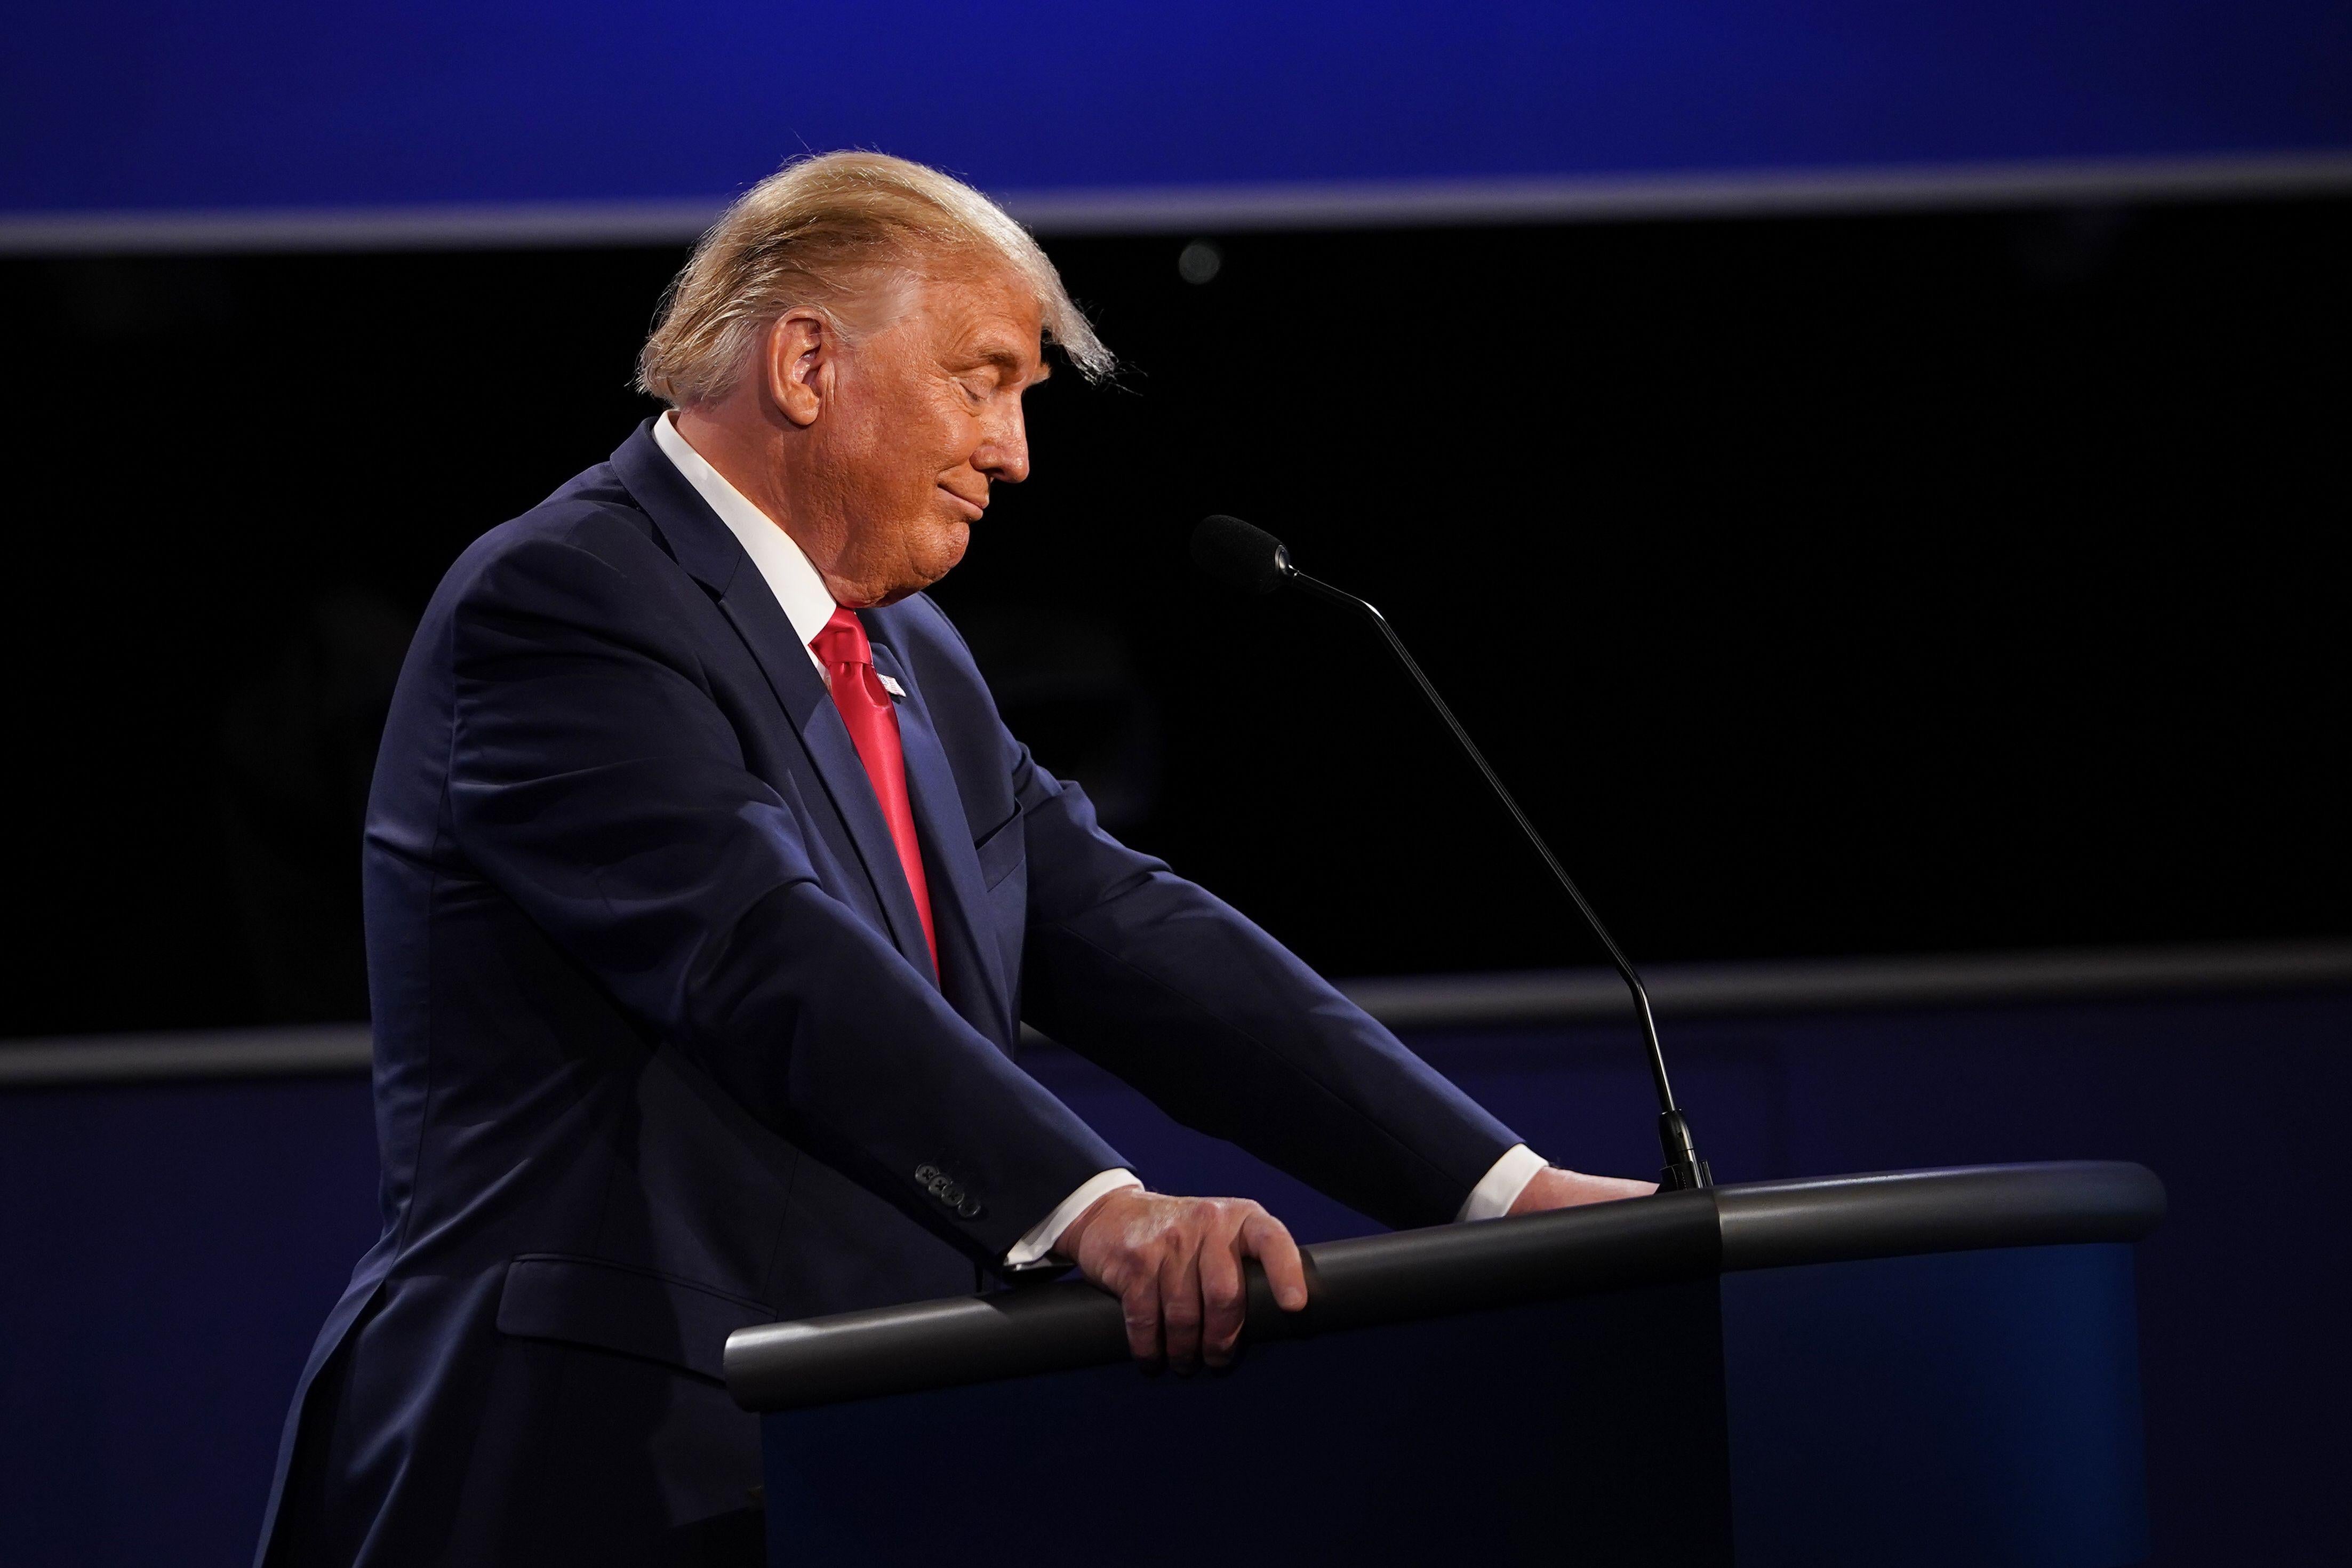 Trump smirks as he stands at his lectern on the debate stage